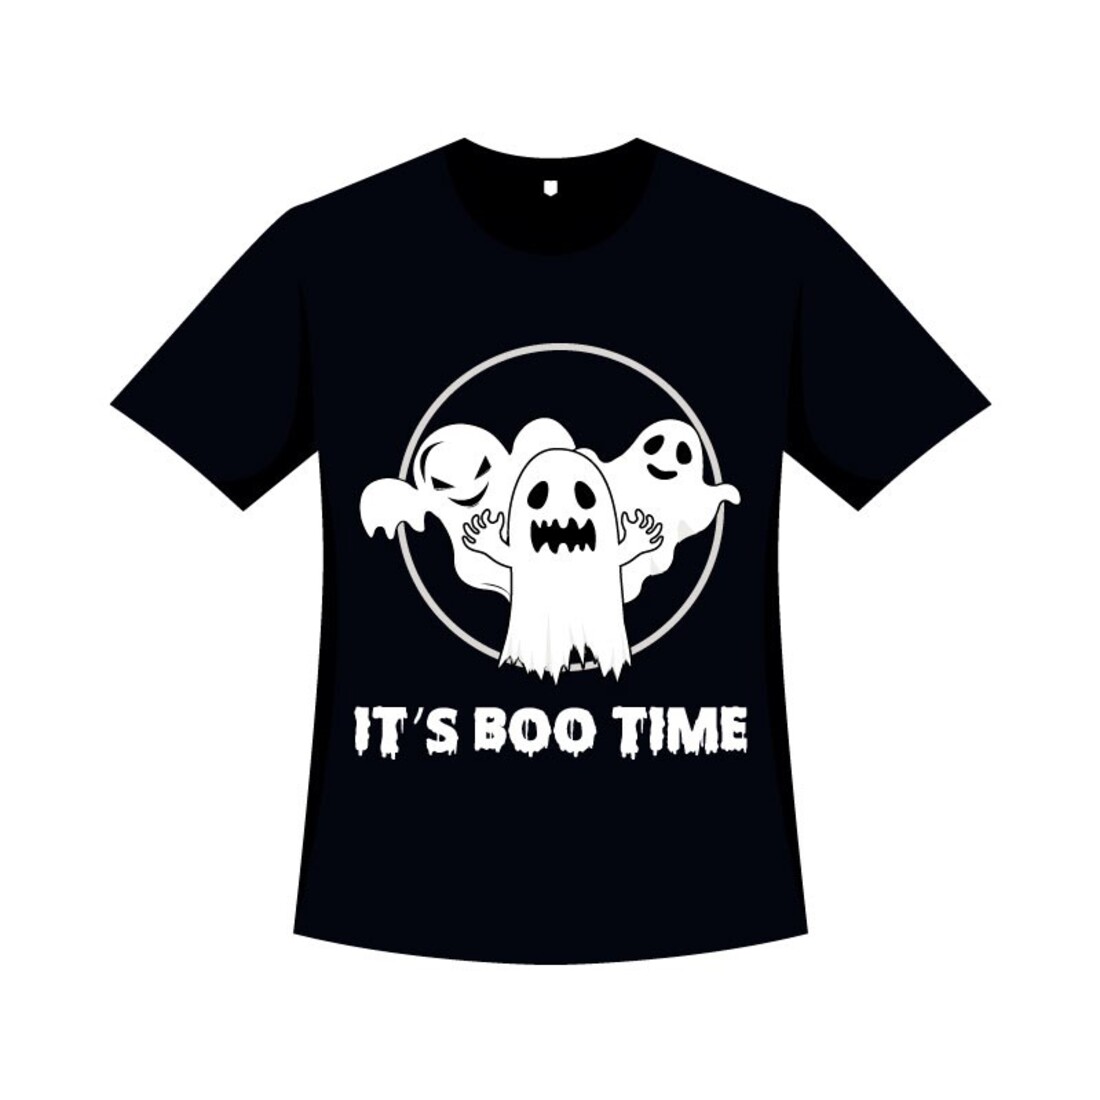 Scary Ghost T-shirt Design Halloween cover image.